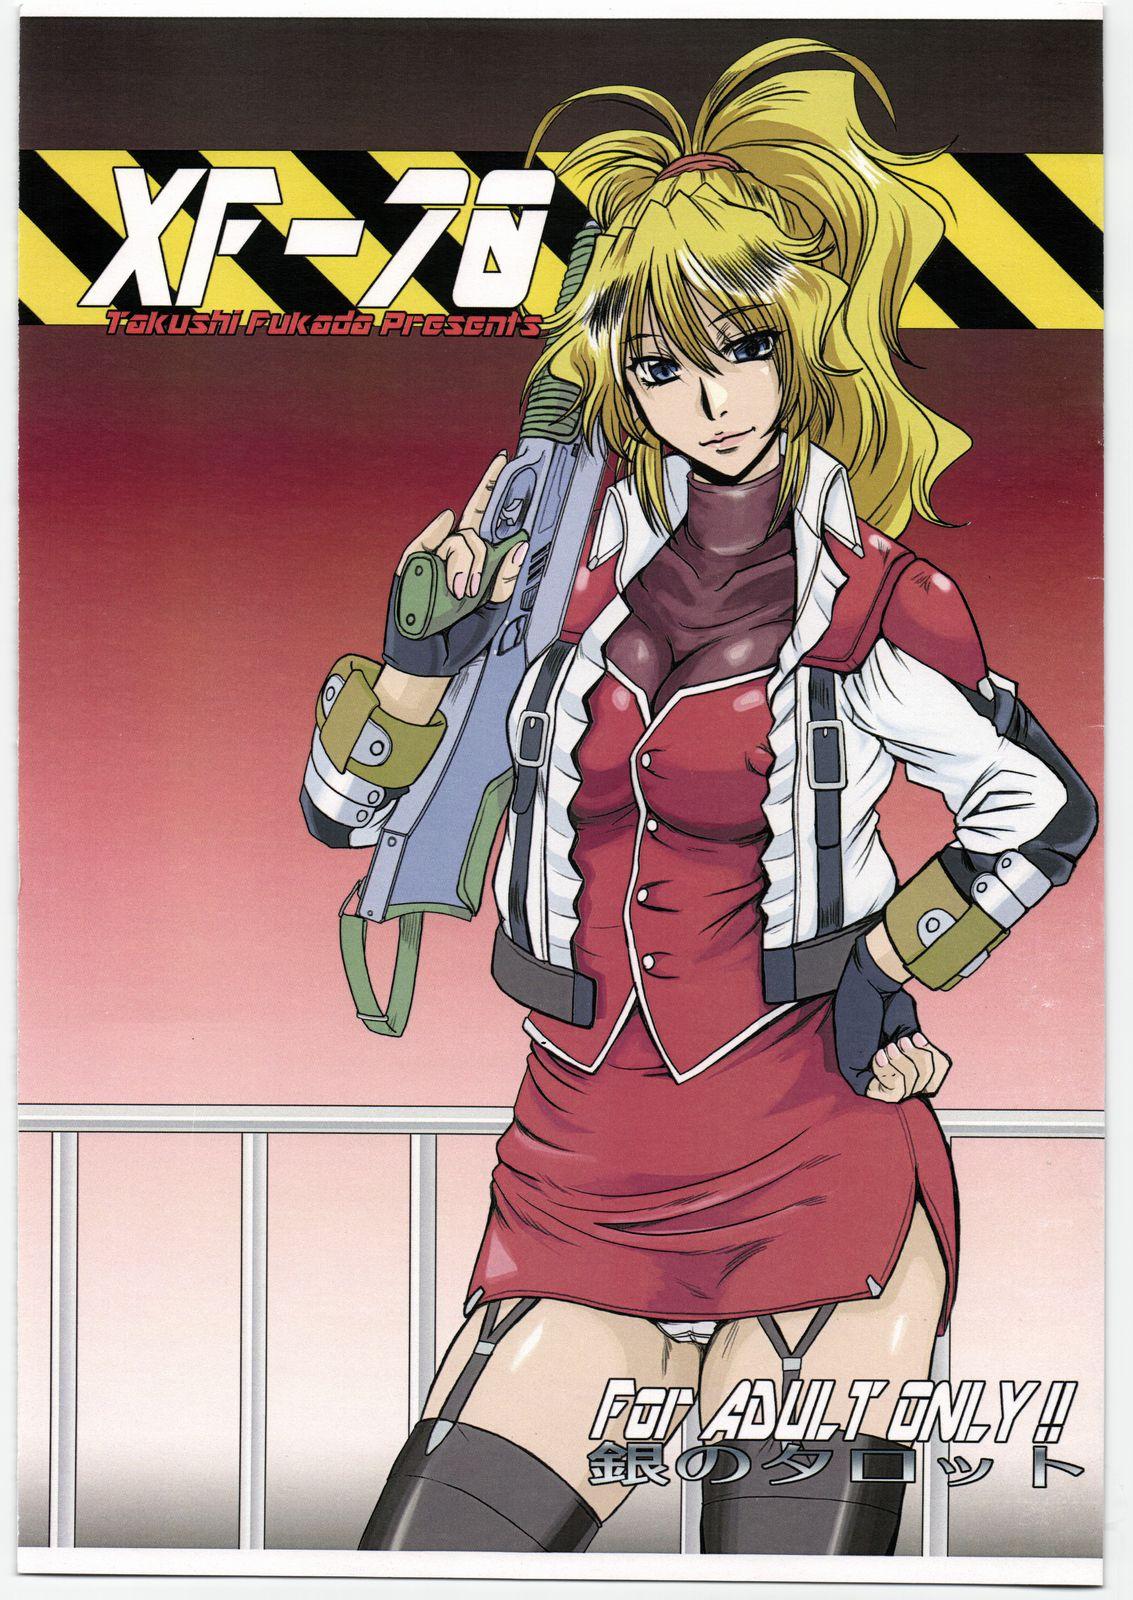 Relax XF-70 - Super robot wars Assfingering - Picture 1